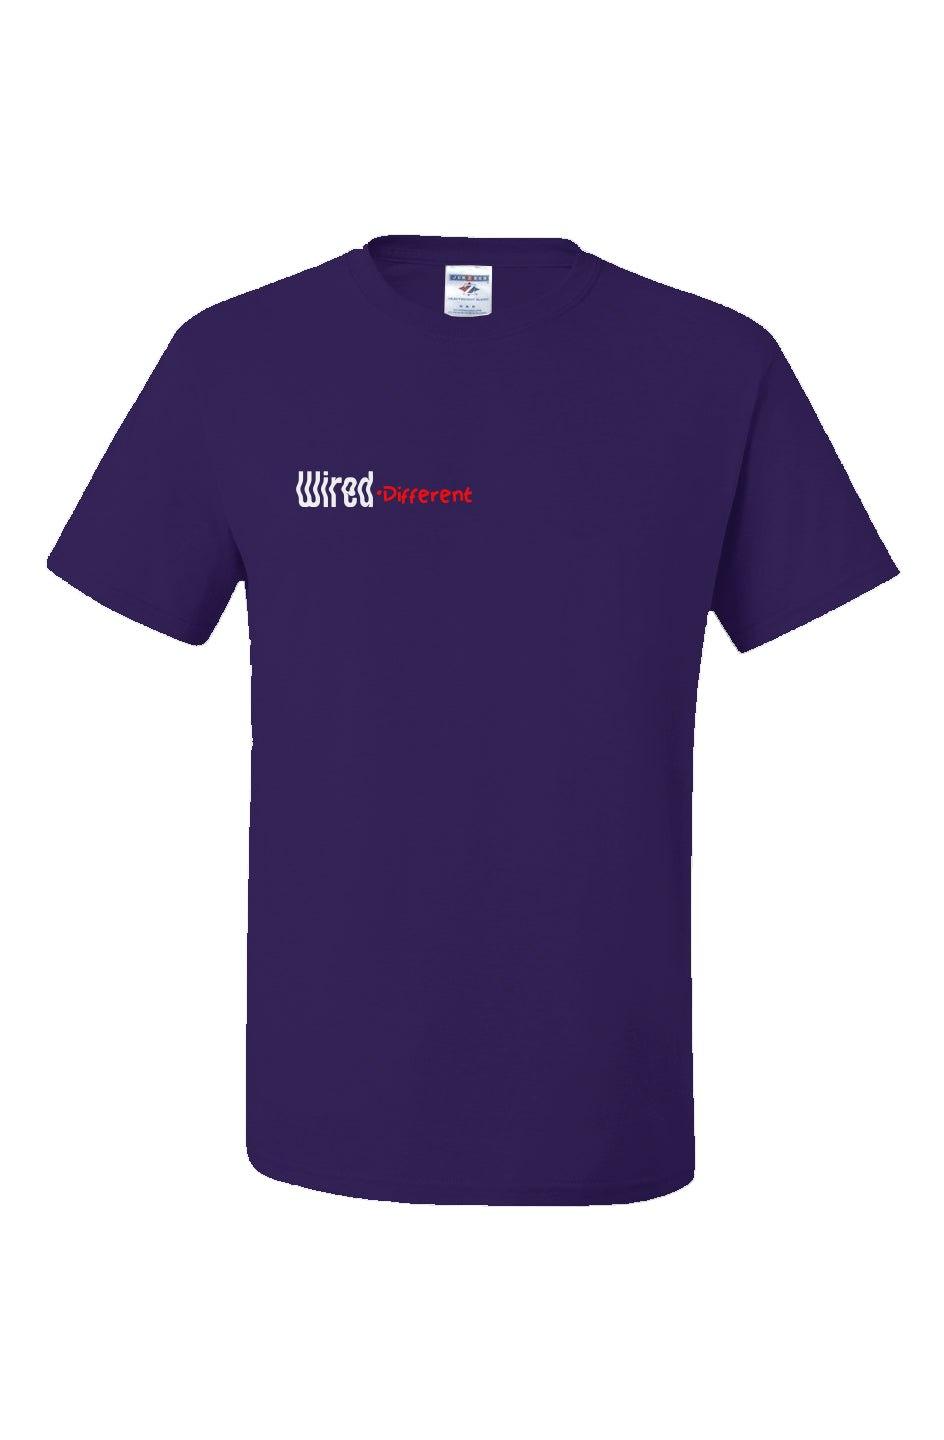 Guadua Wired•Different Tee_Purple